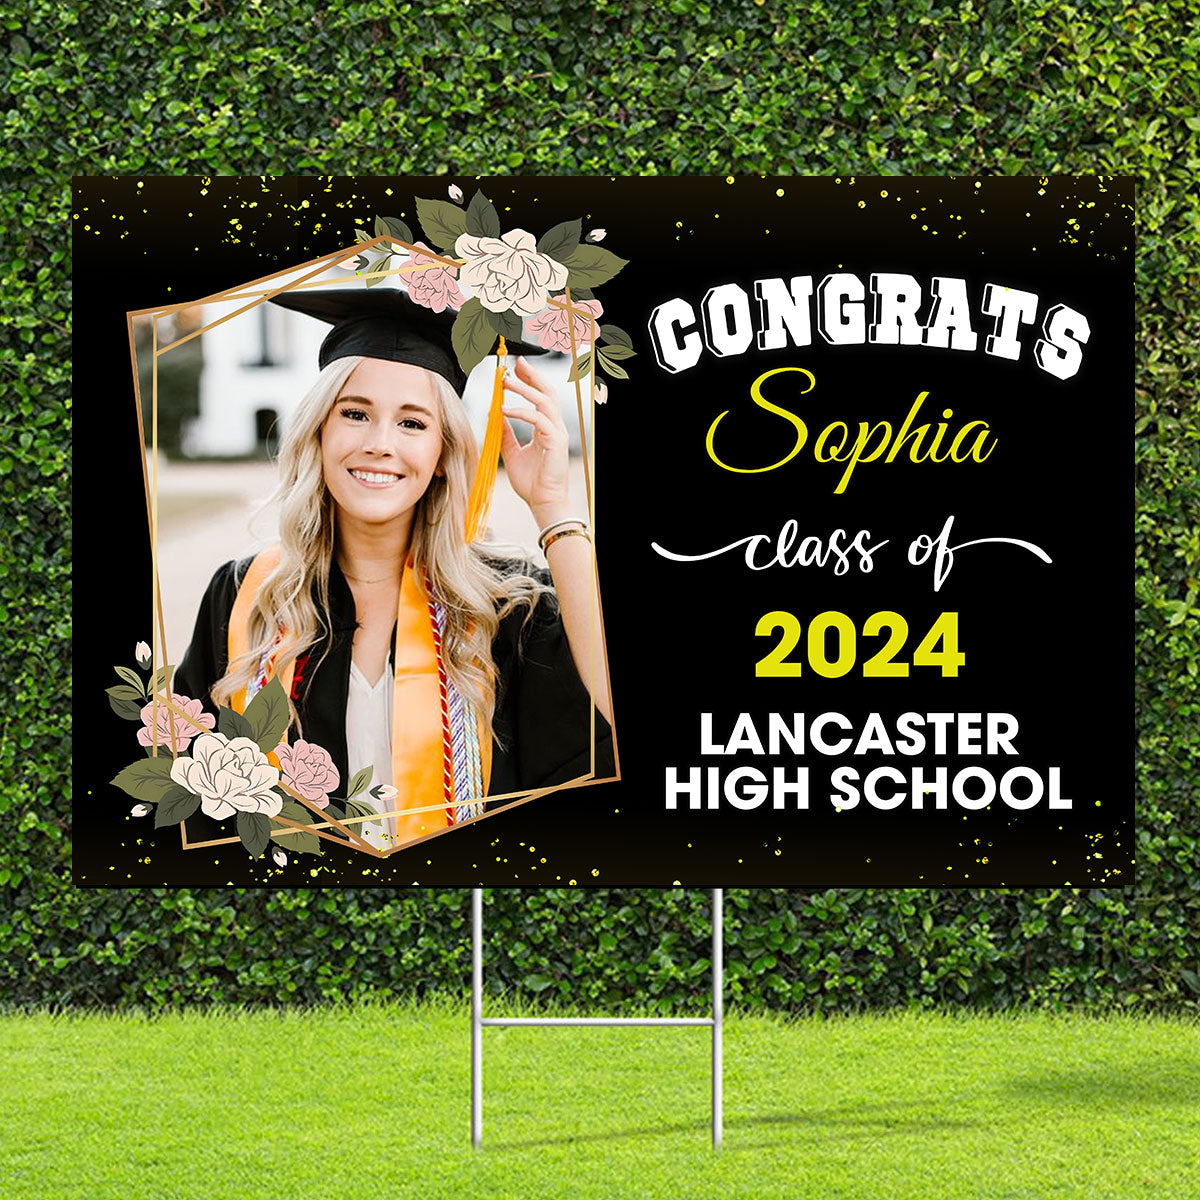 Congrats Custom Photo, Background And Texts - Personalized Lawn Sign, Yard Sign, Graduation Gift, College Graduation